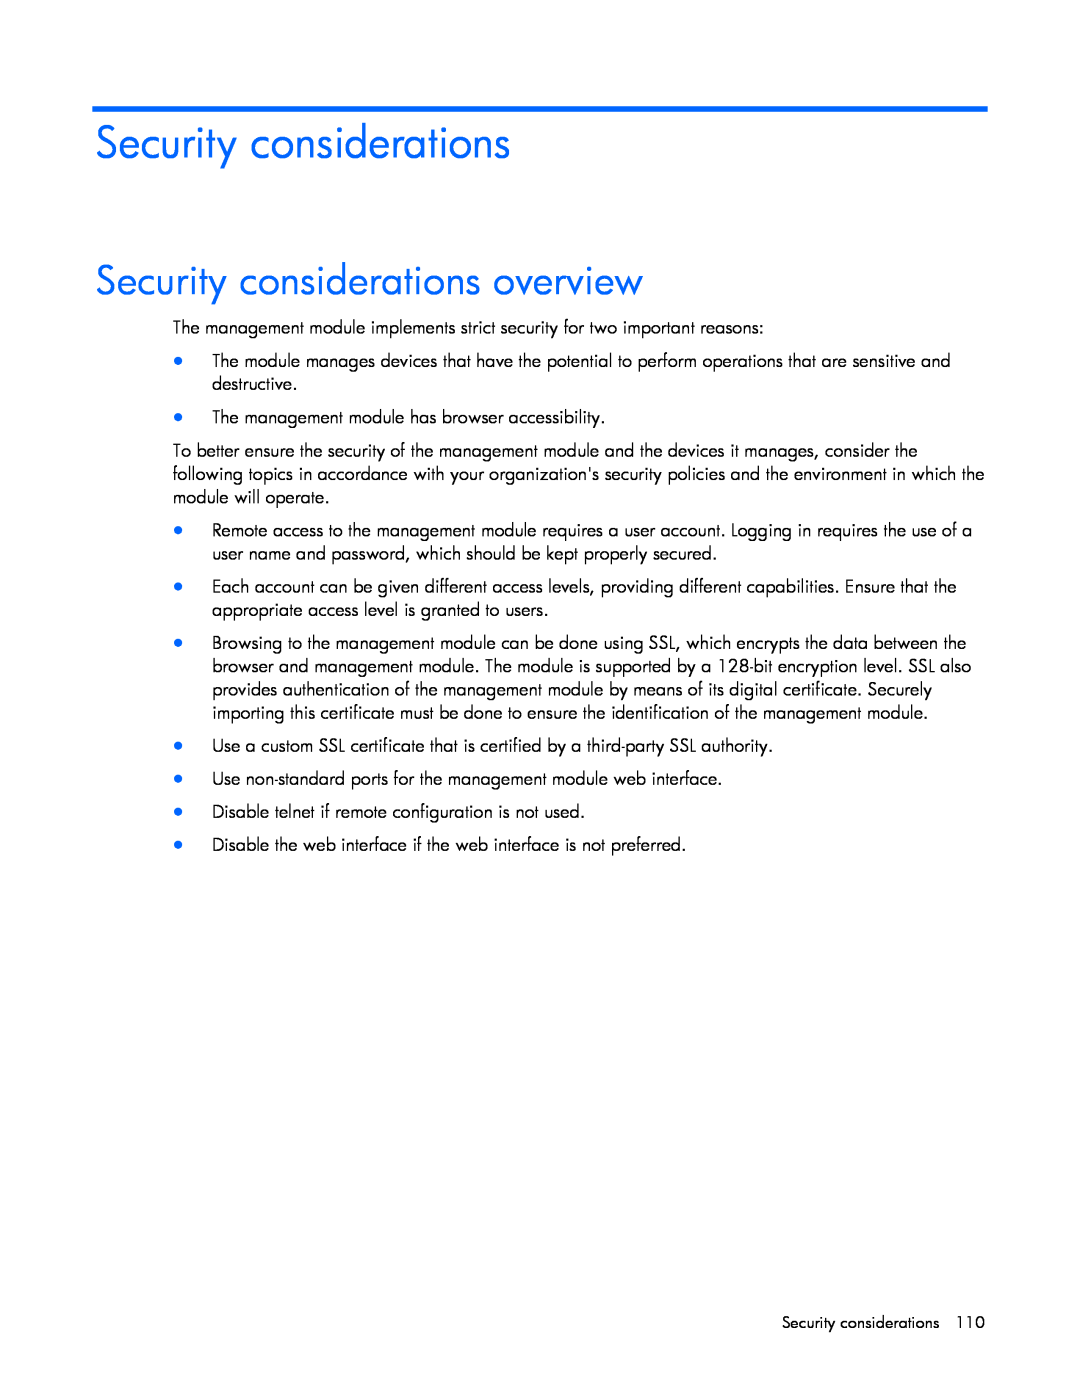 HP J4370A, A6584A, A1354A, A1353A, A1356A, J4373A, J4367A manual Security considerations overview 